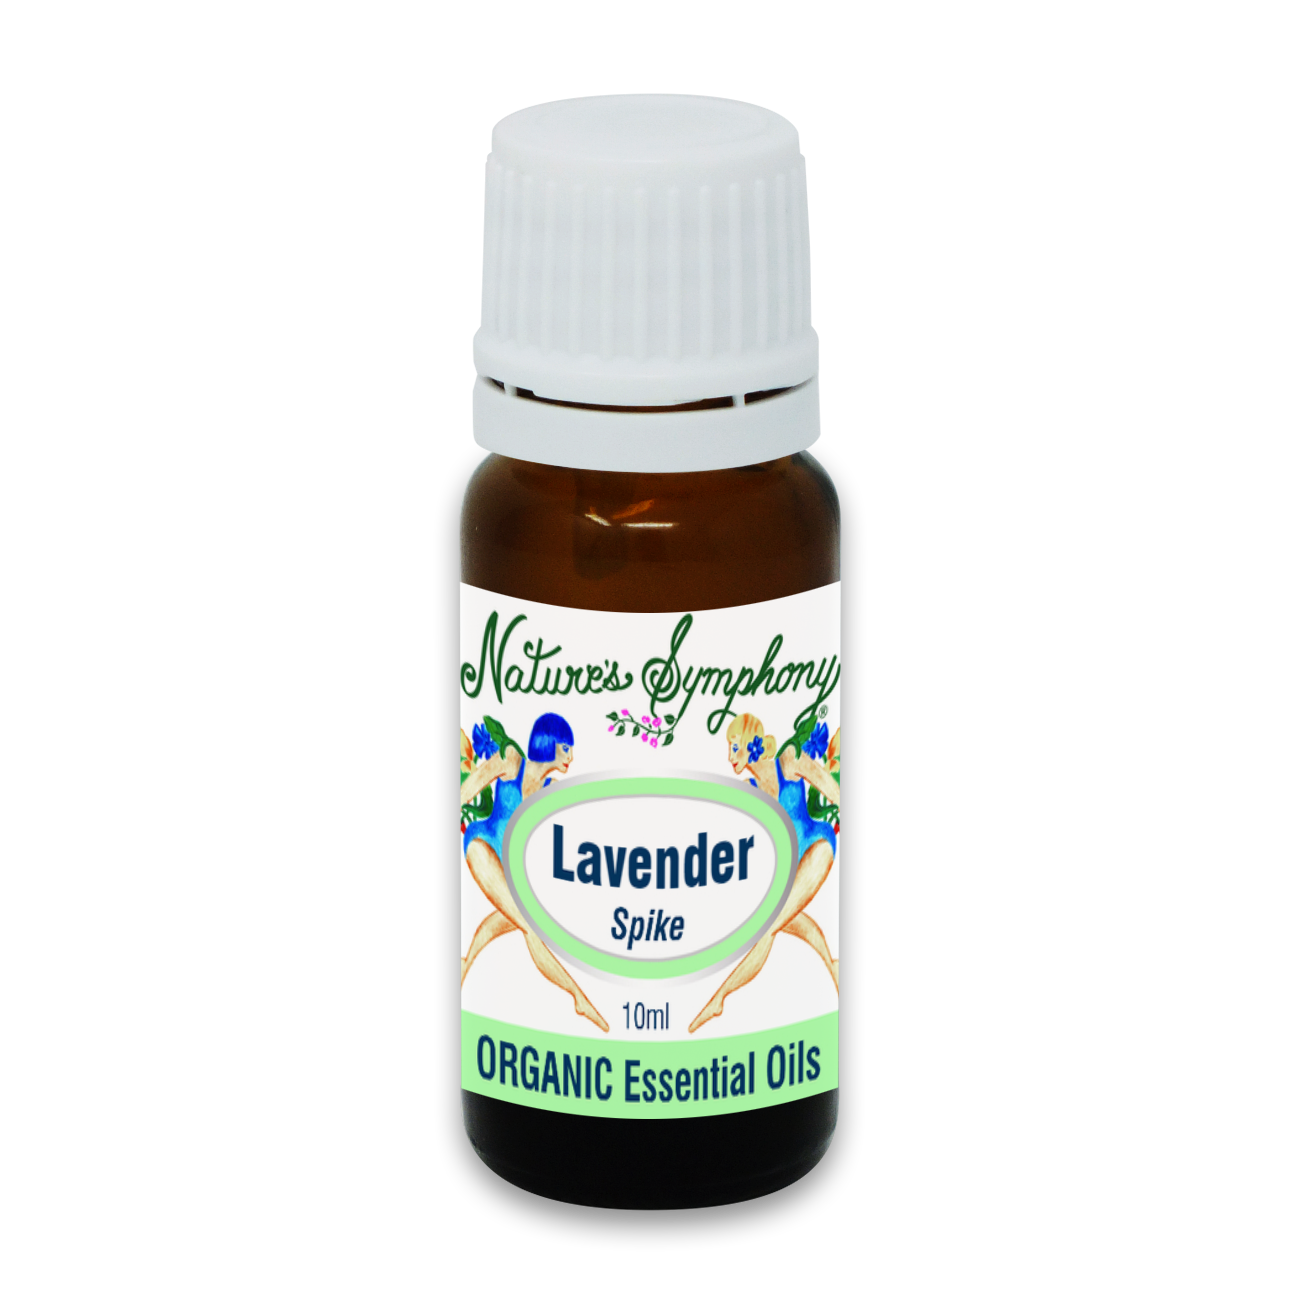 Lavender Spike, Organic/Wildcrafted oil - 10ml